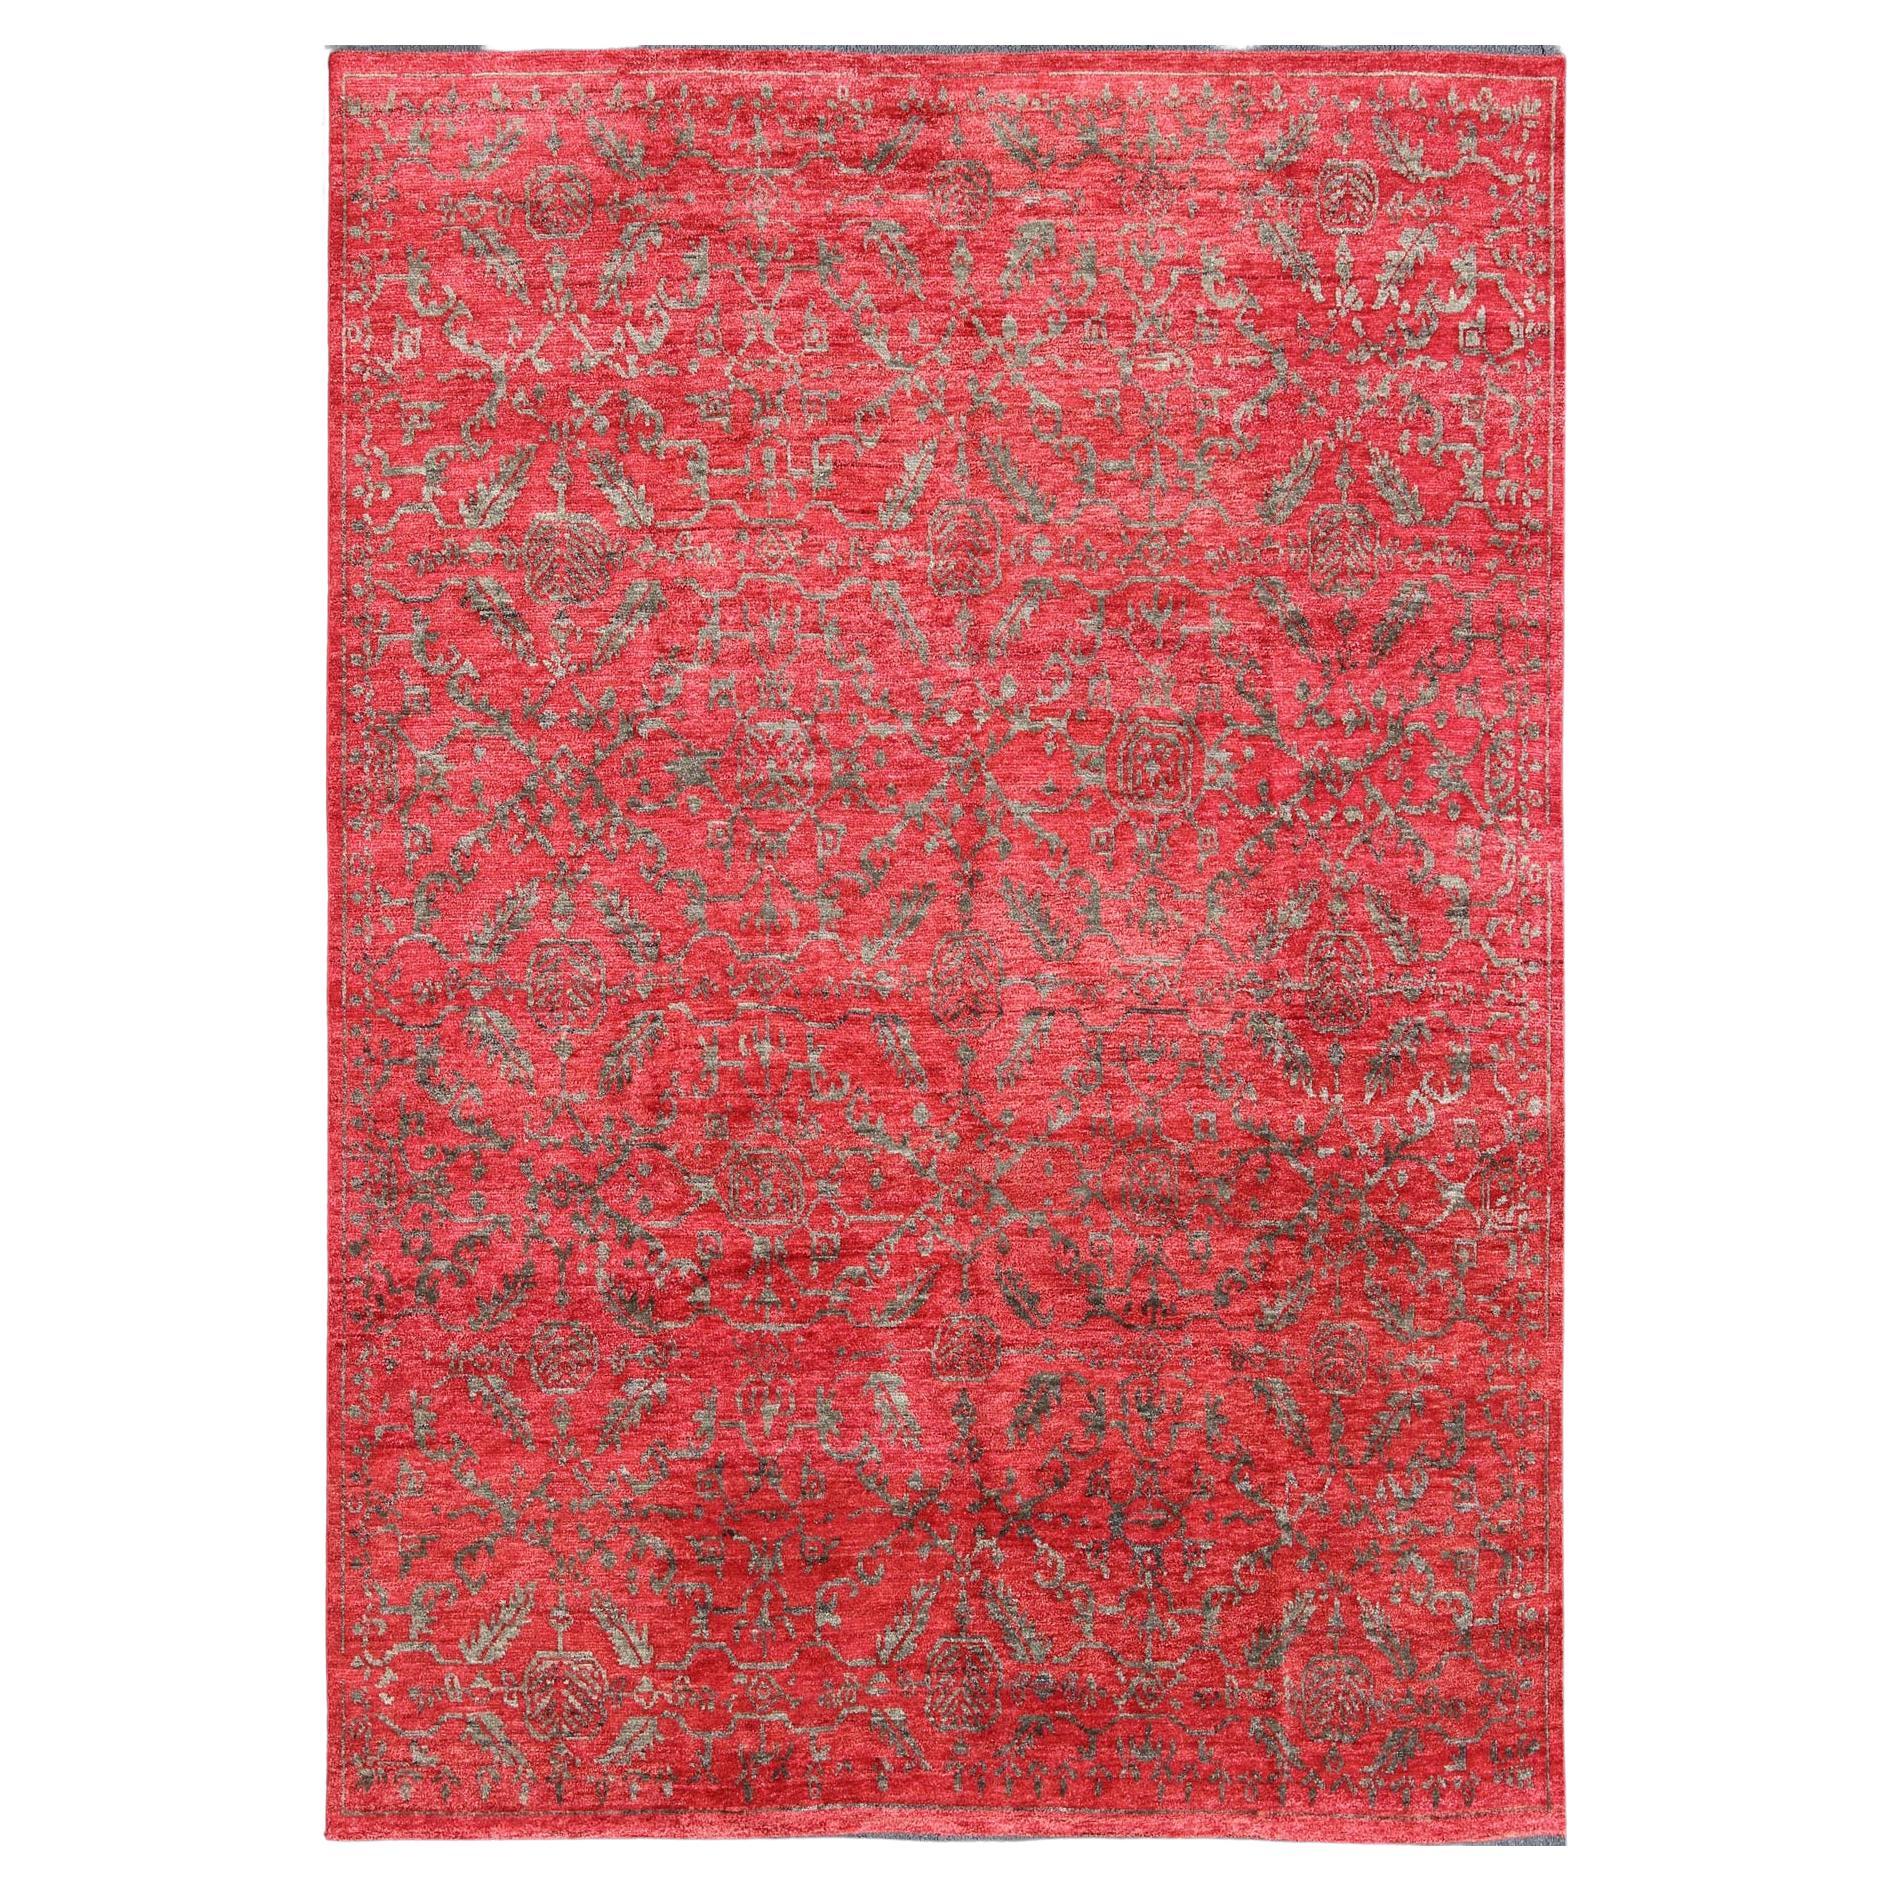 Large Transitional All-Over Design Red Background Rug with Gray Highlights